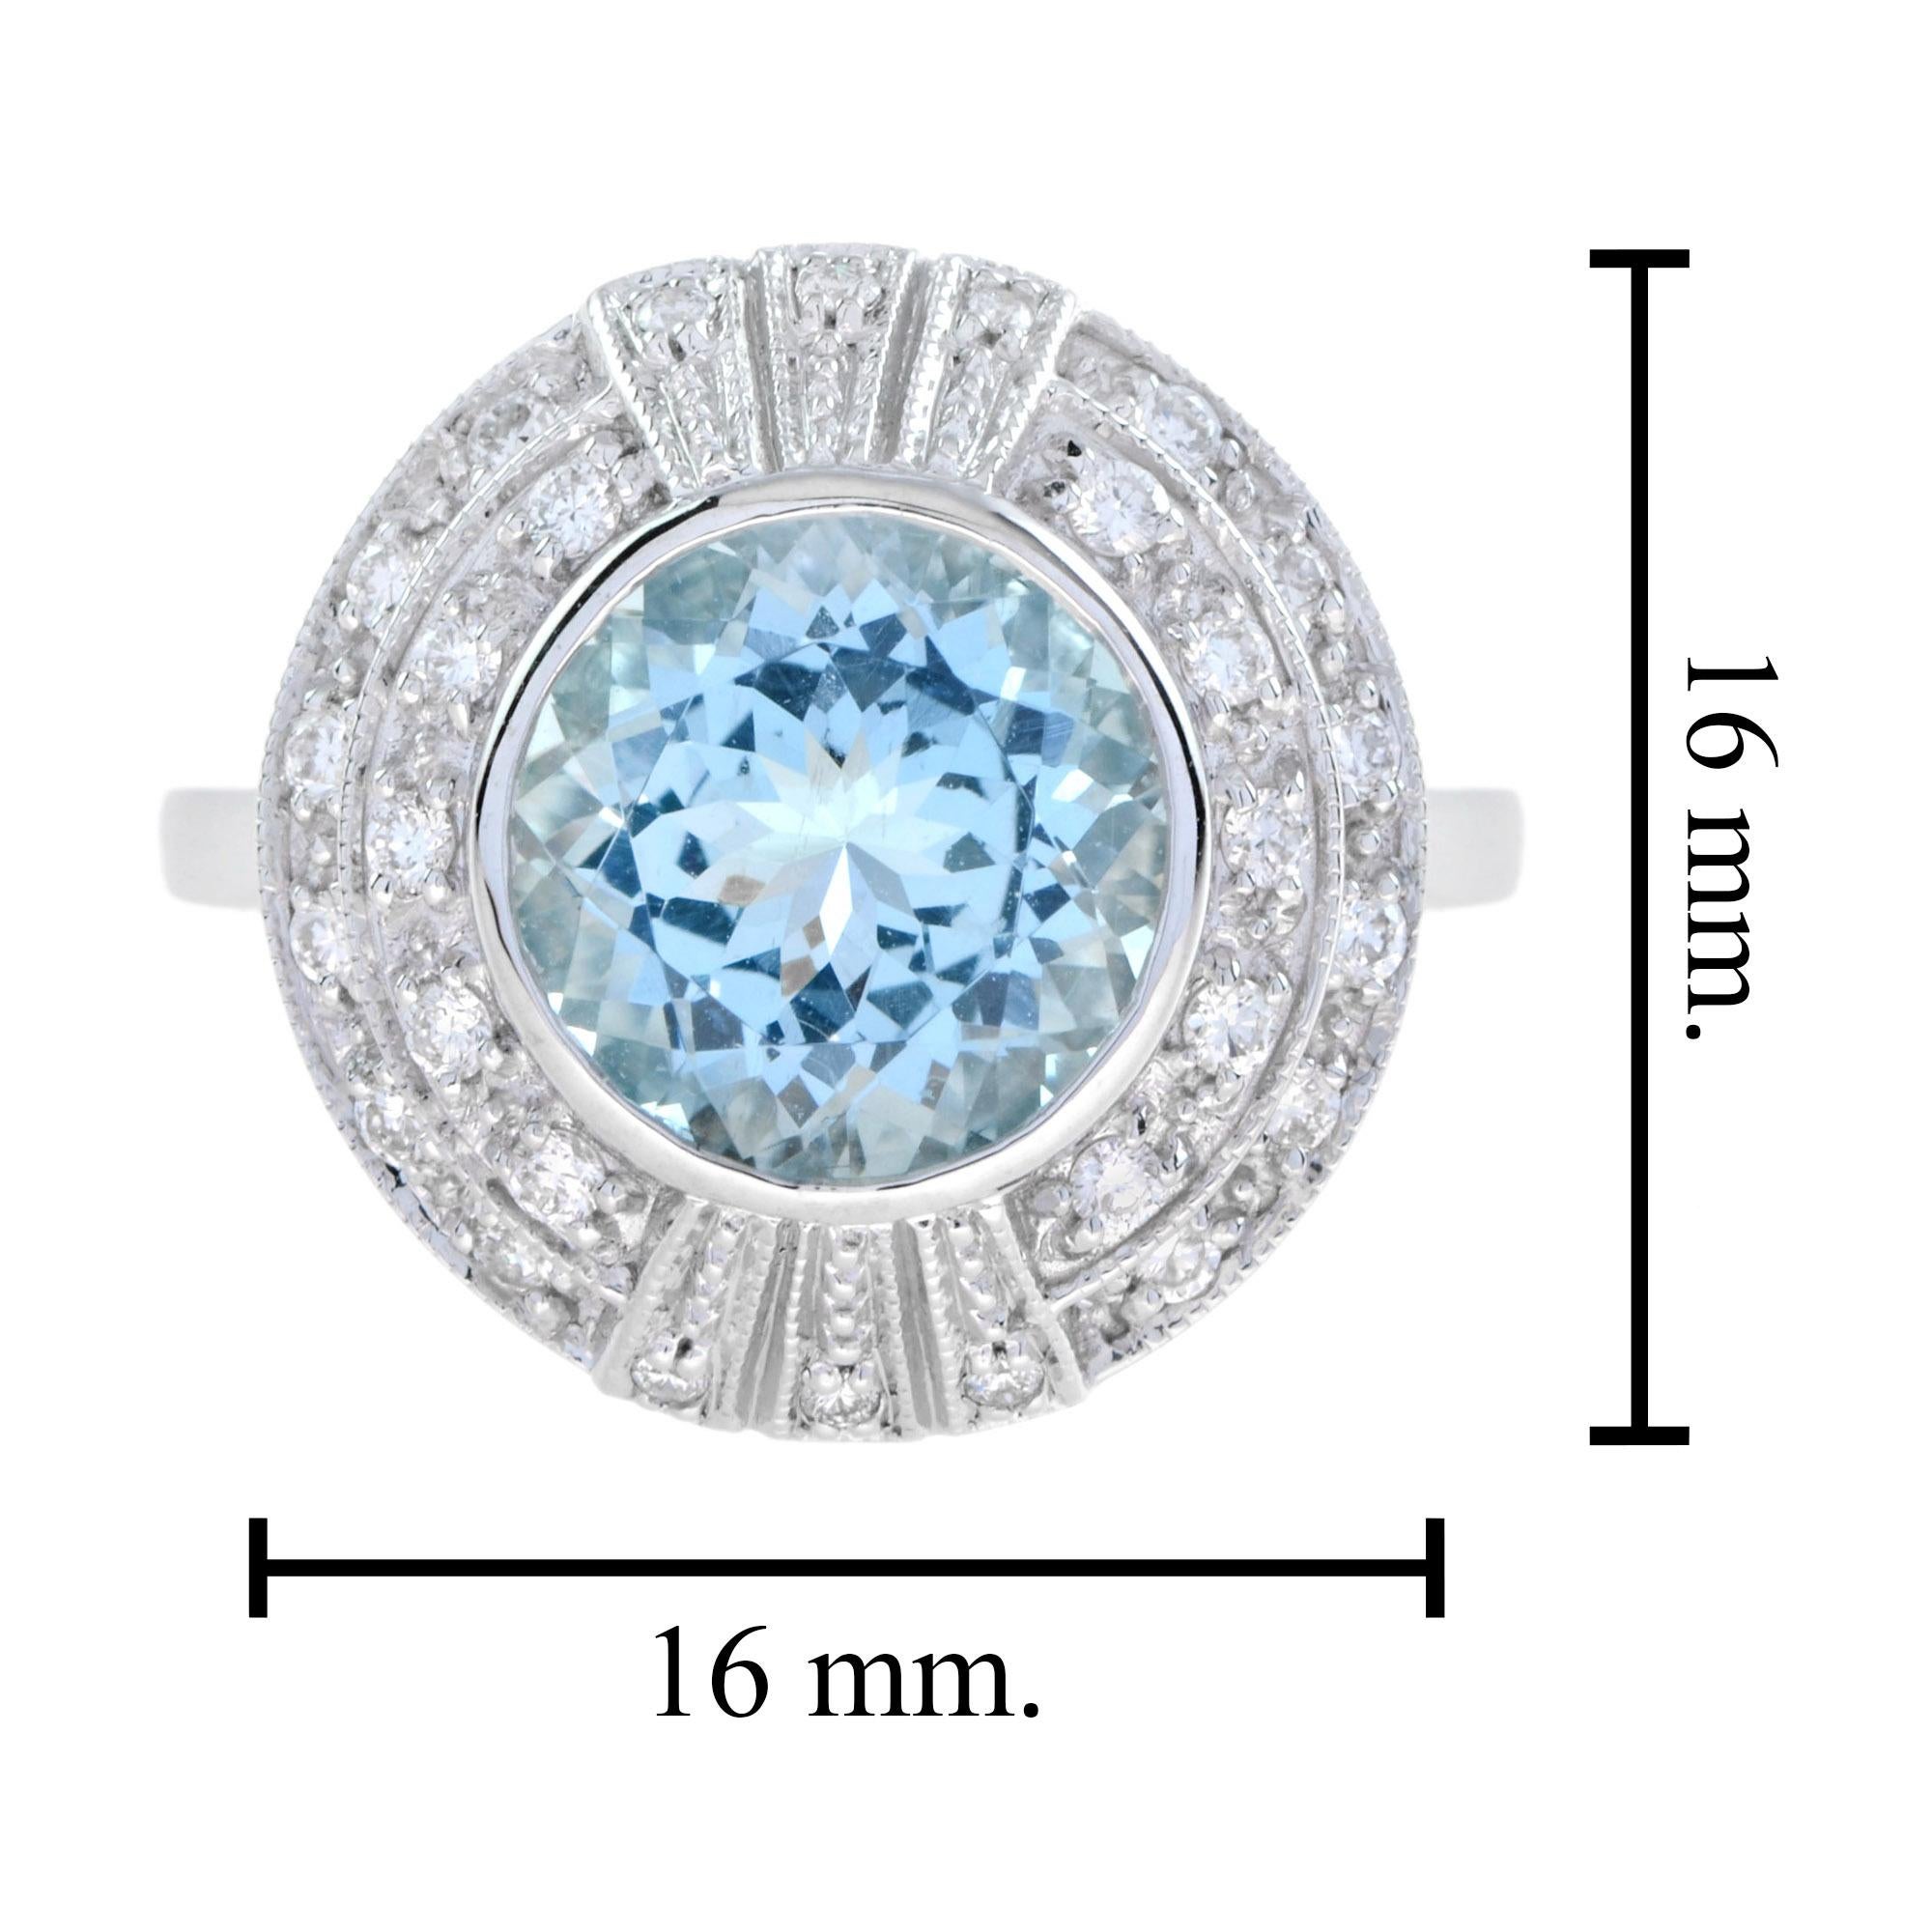 For Sale:  Extraordinary 2.2 Carats Aquamarine and Diamond Halo Ring in 18K White Gold 6